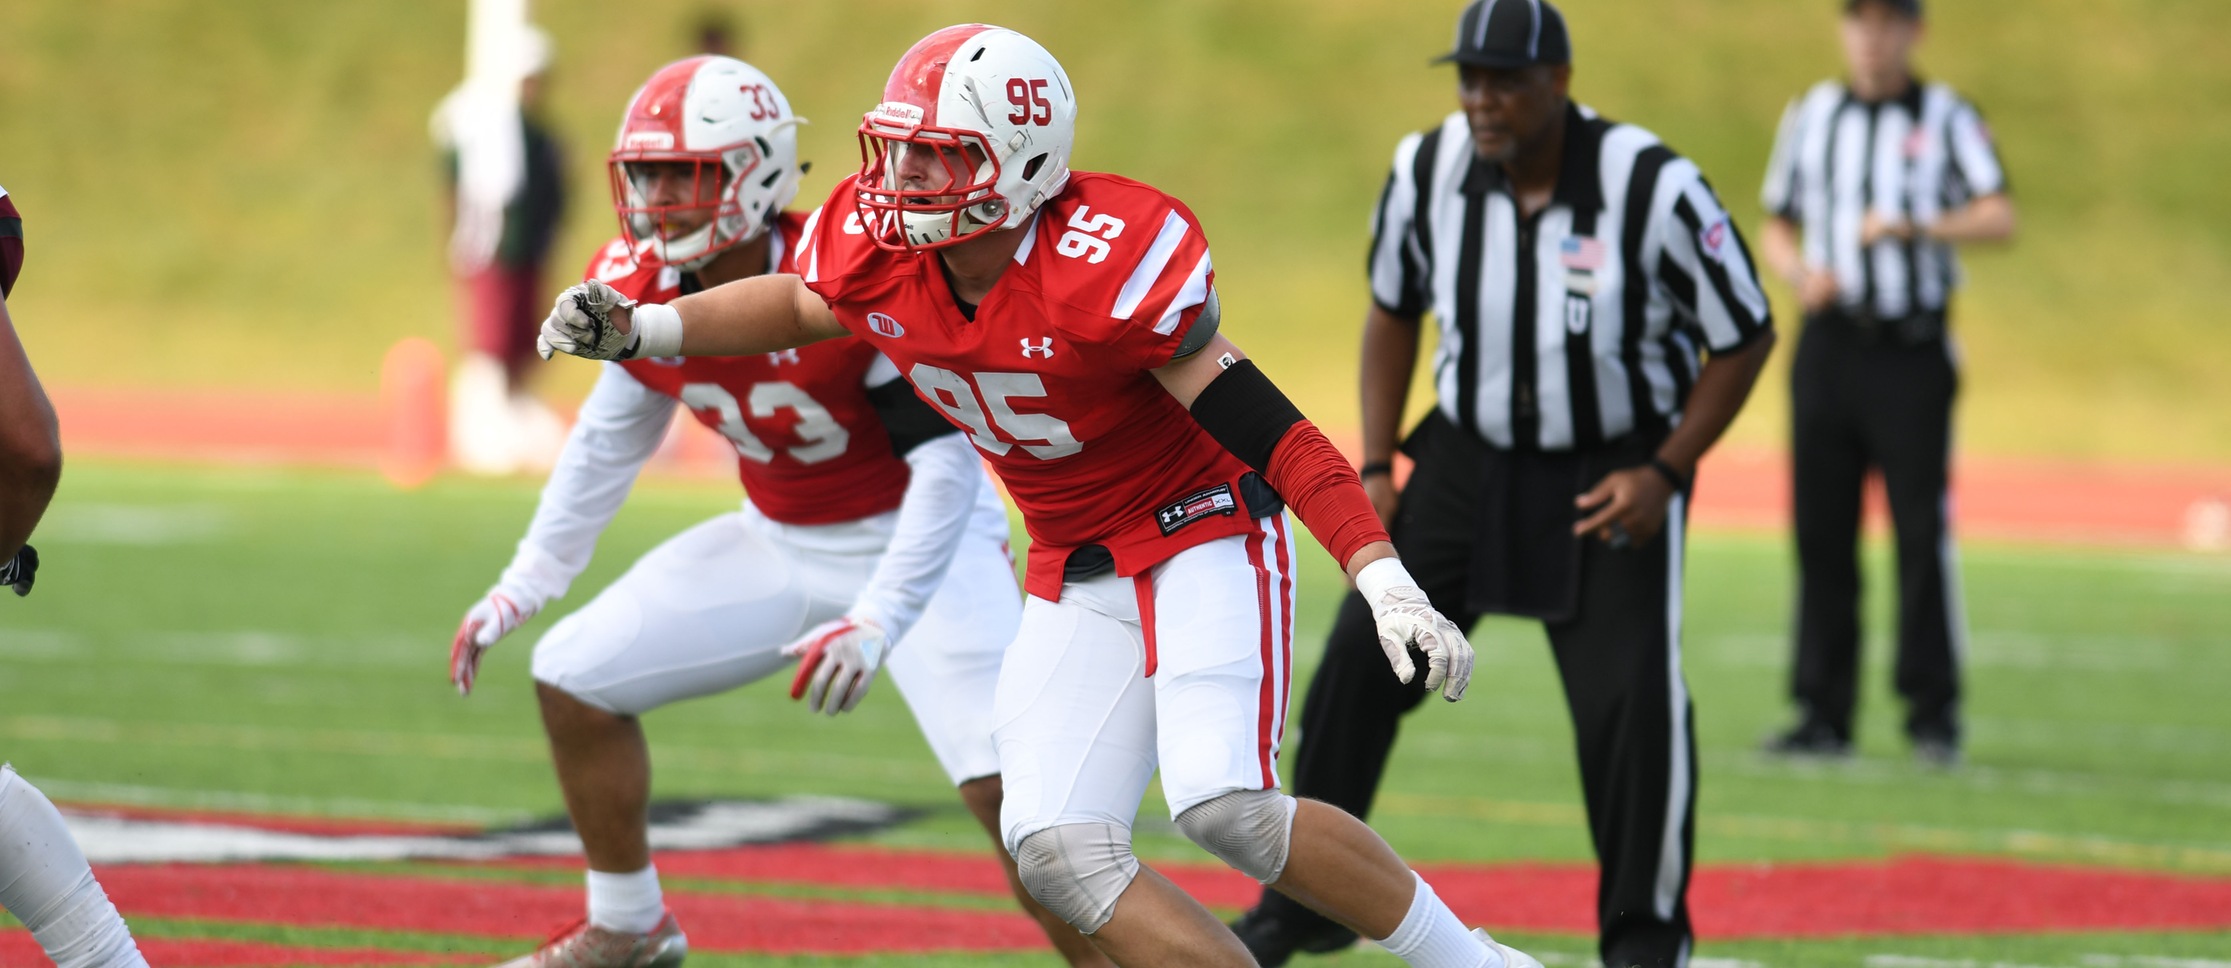 #14 Wittenberg Holds Kenyon to Negative Rushing Yards in 48-11 Victory